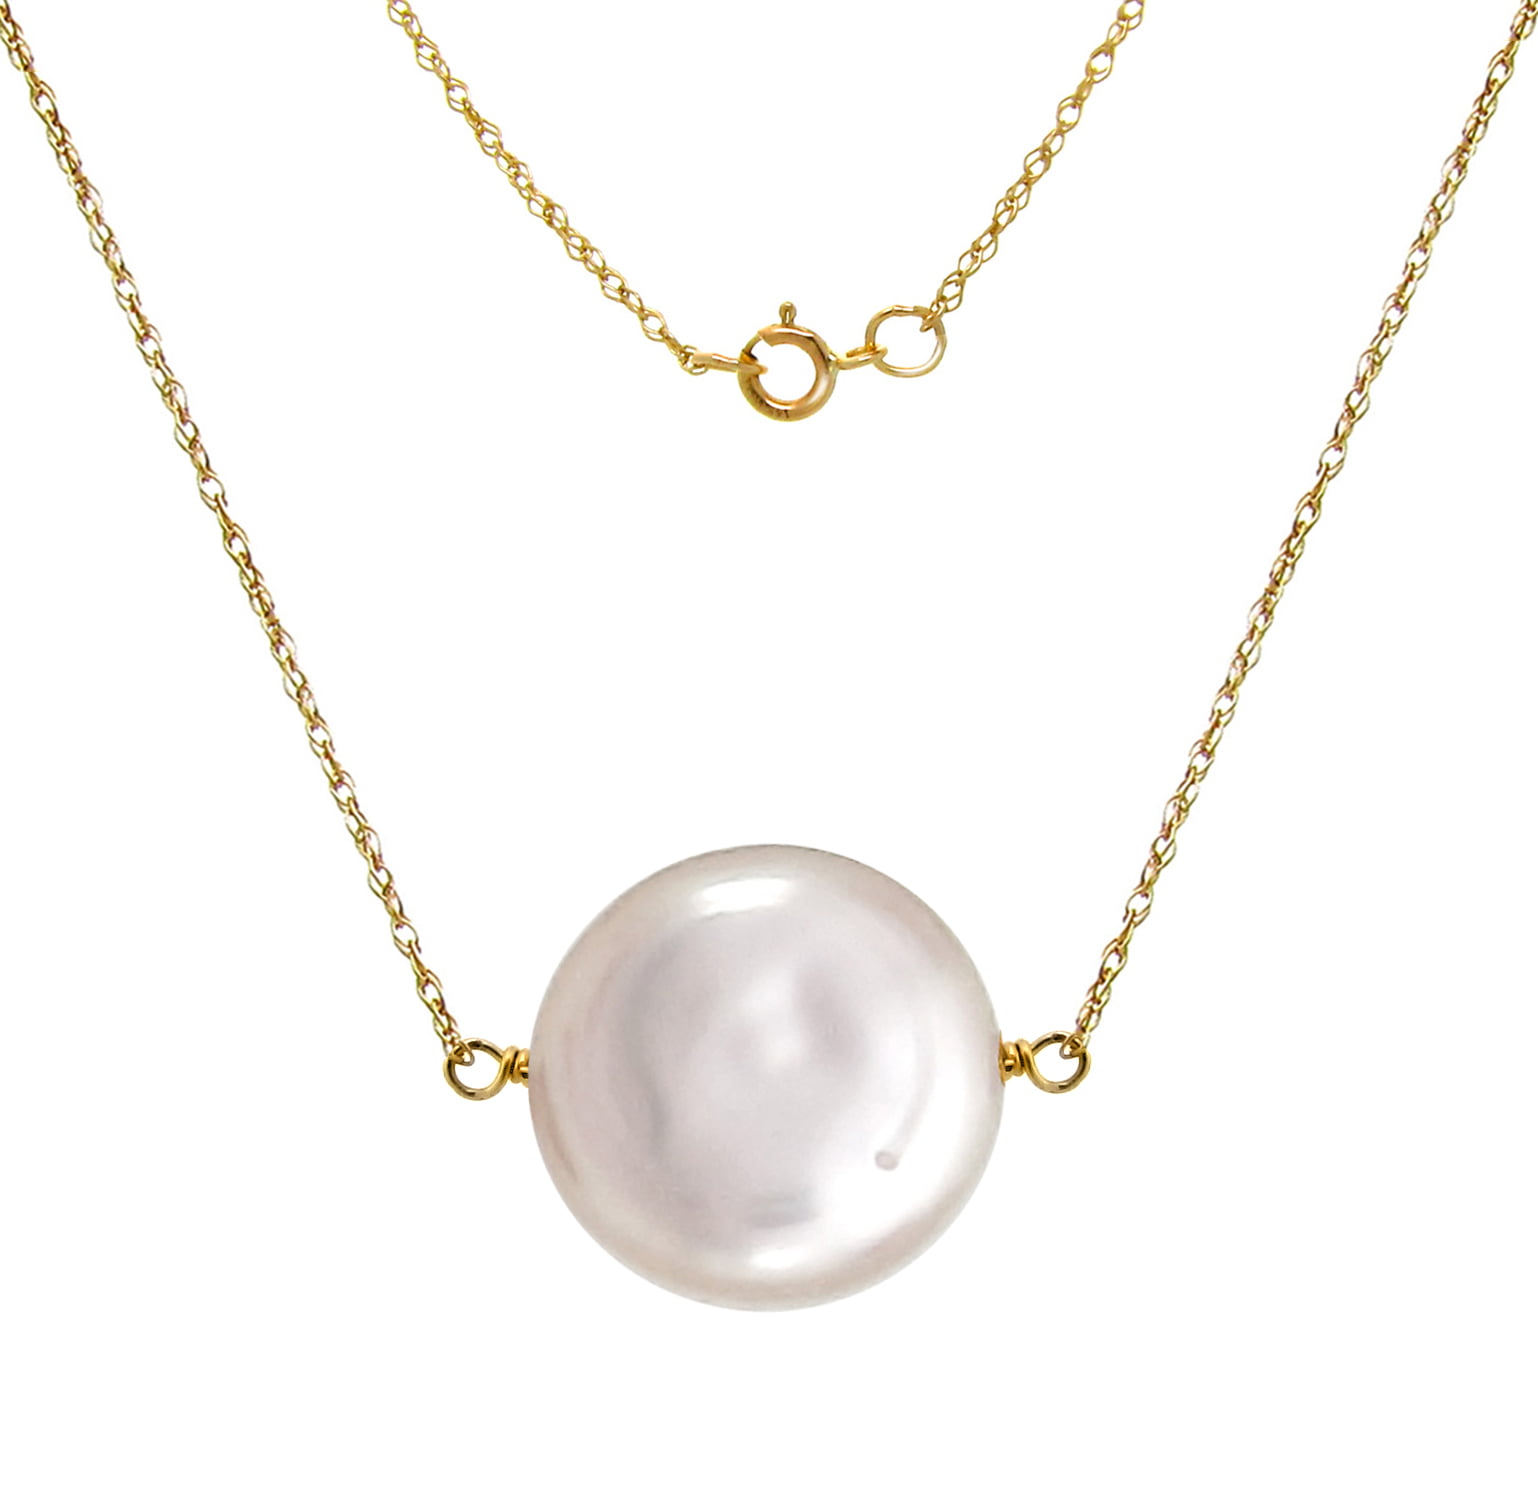 14k Yellow White or Rose Gold Rope Chain 7 Millimeters White Freshwater Cultured Pearl Necklace